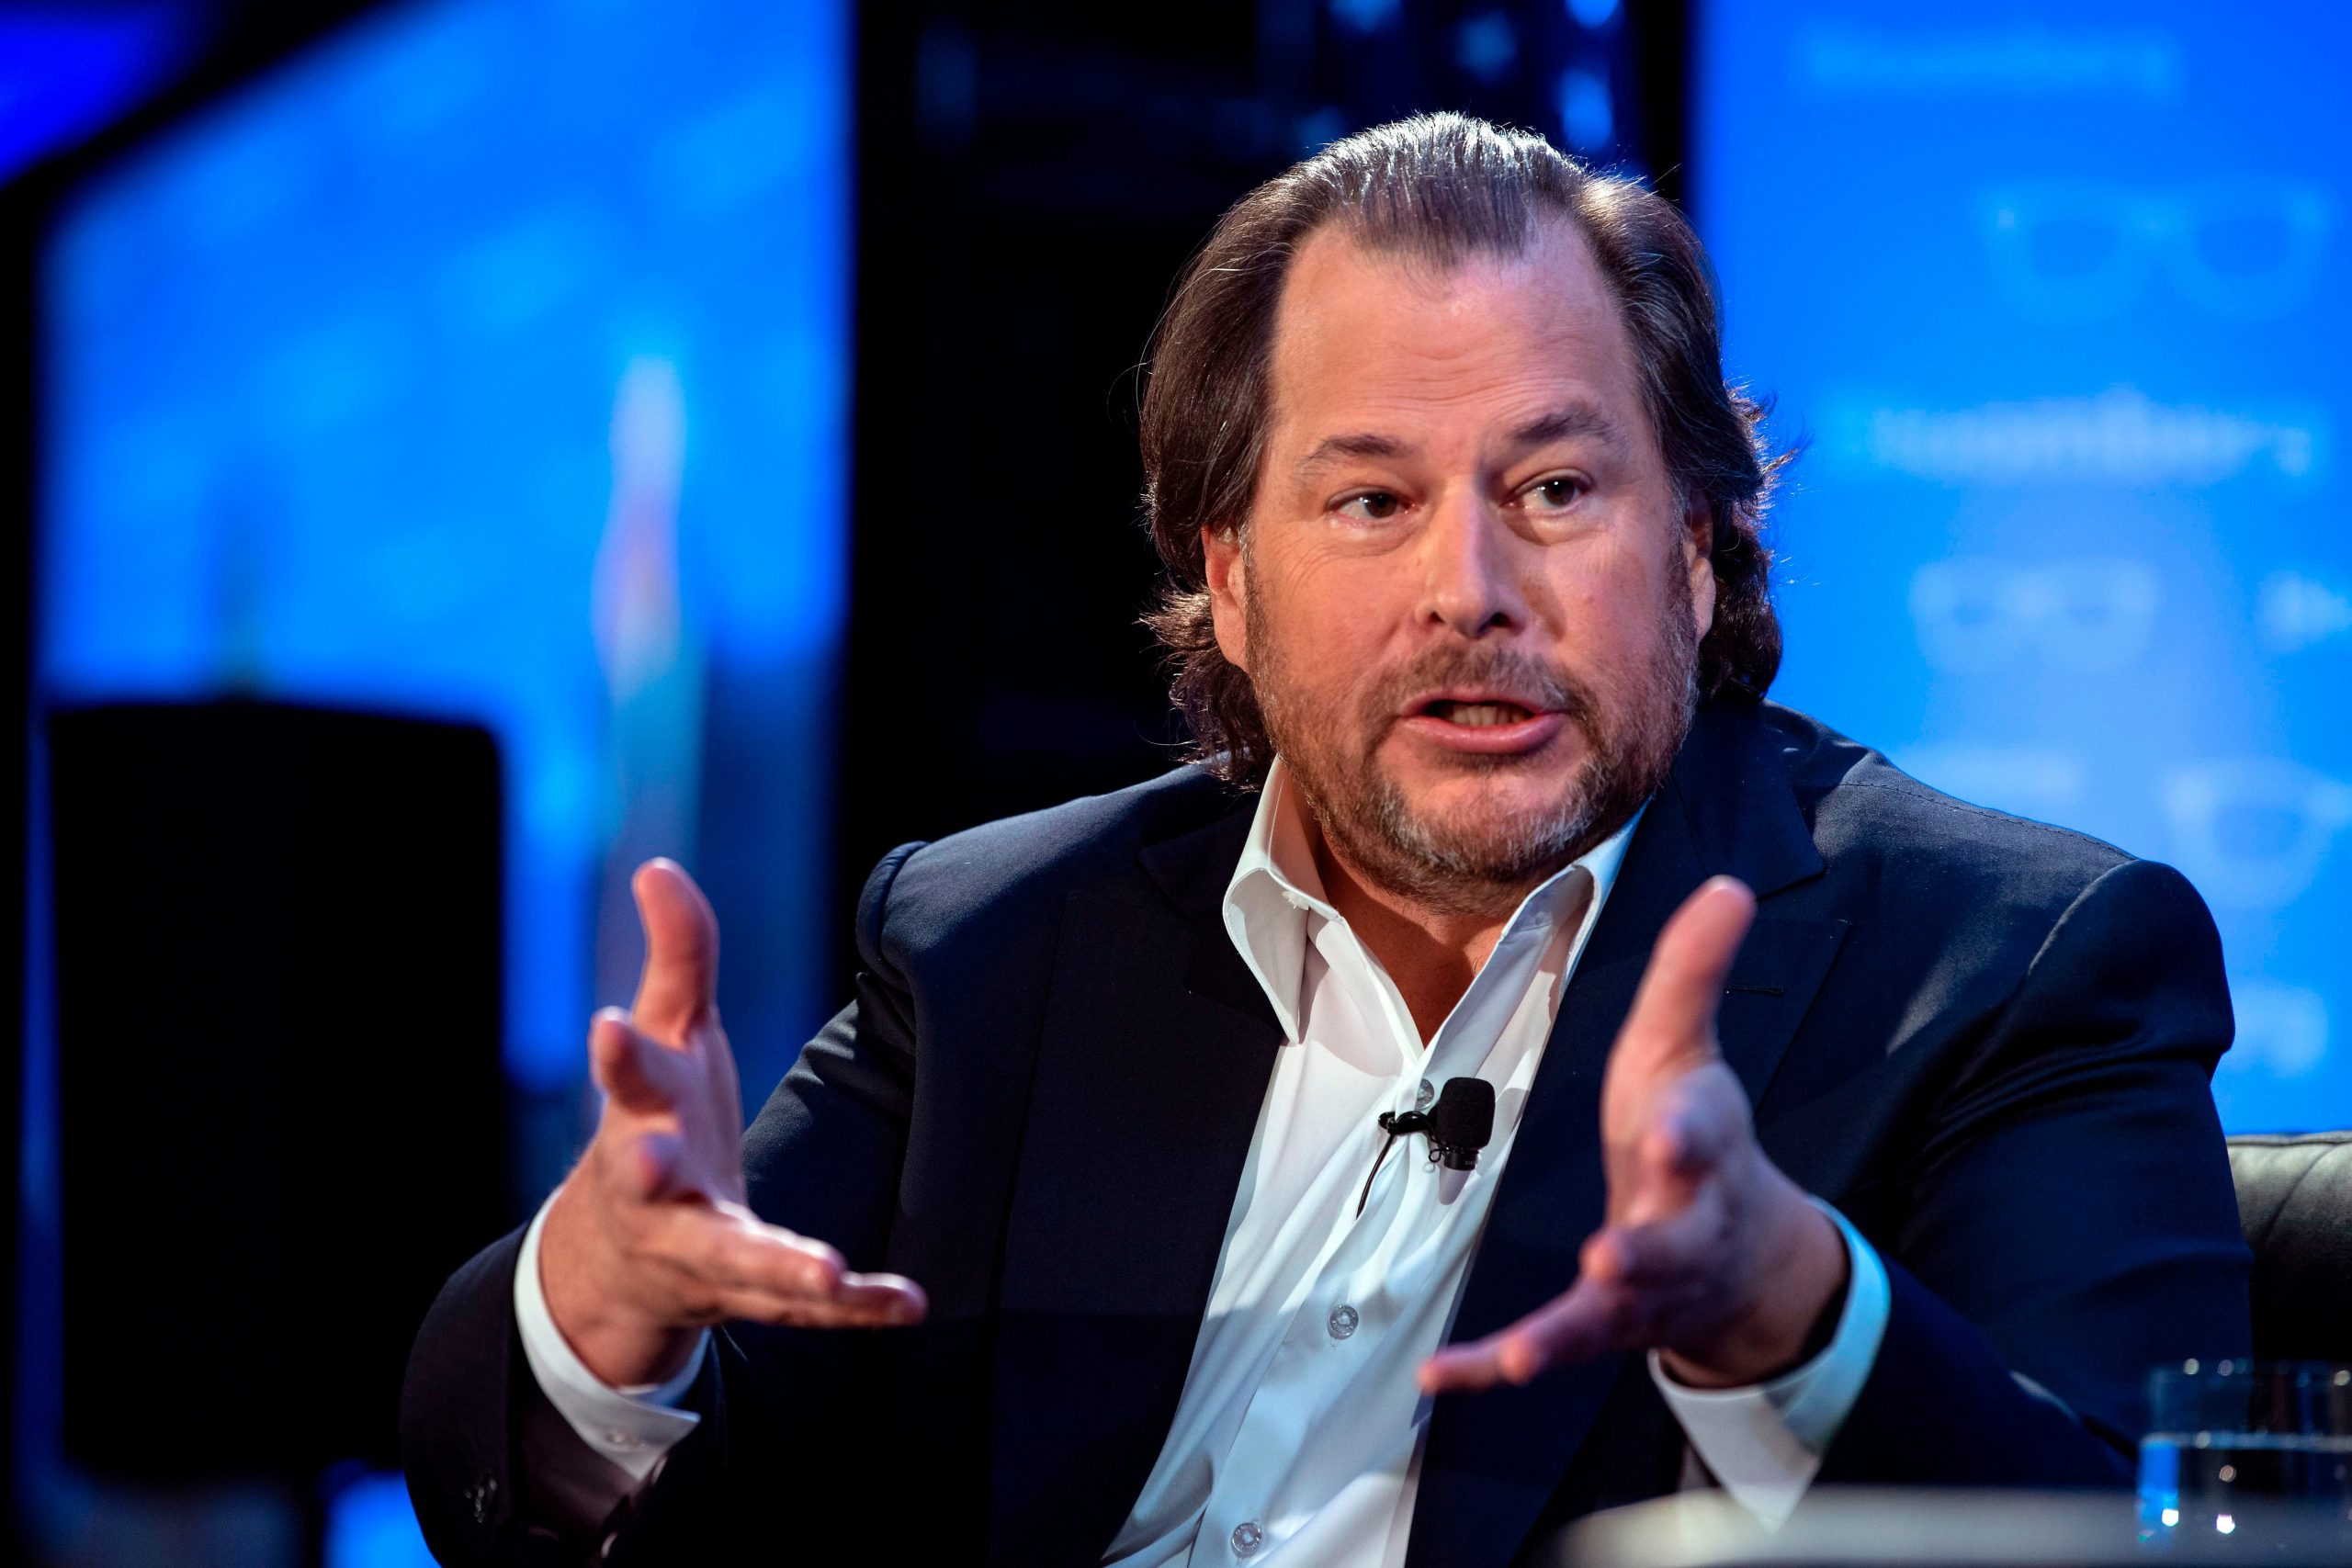 Salesforce founder Marc Benioff, wearing a sports coat jacket and in front of a blue background on a stage, extends his hands forward during a talk.